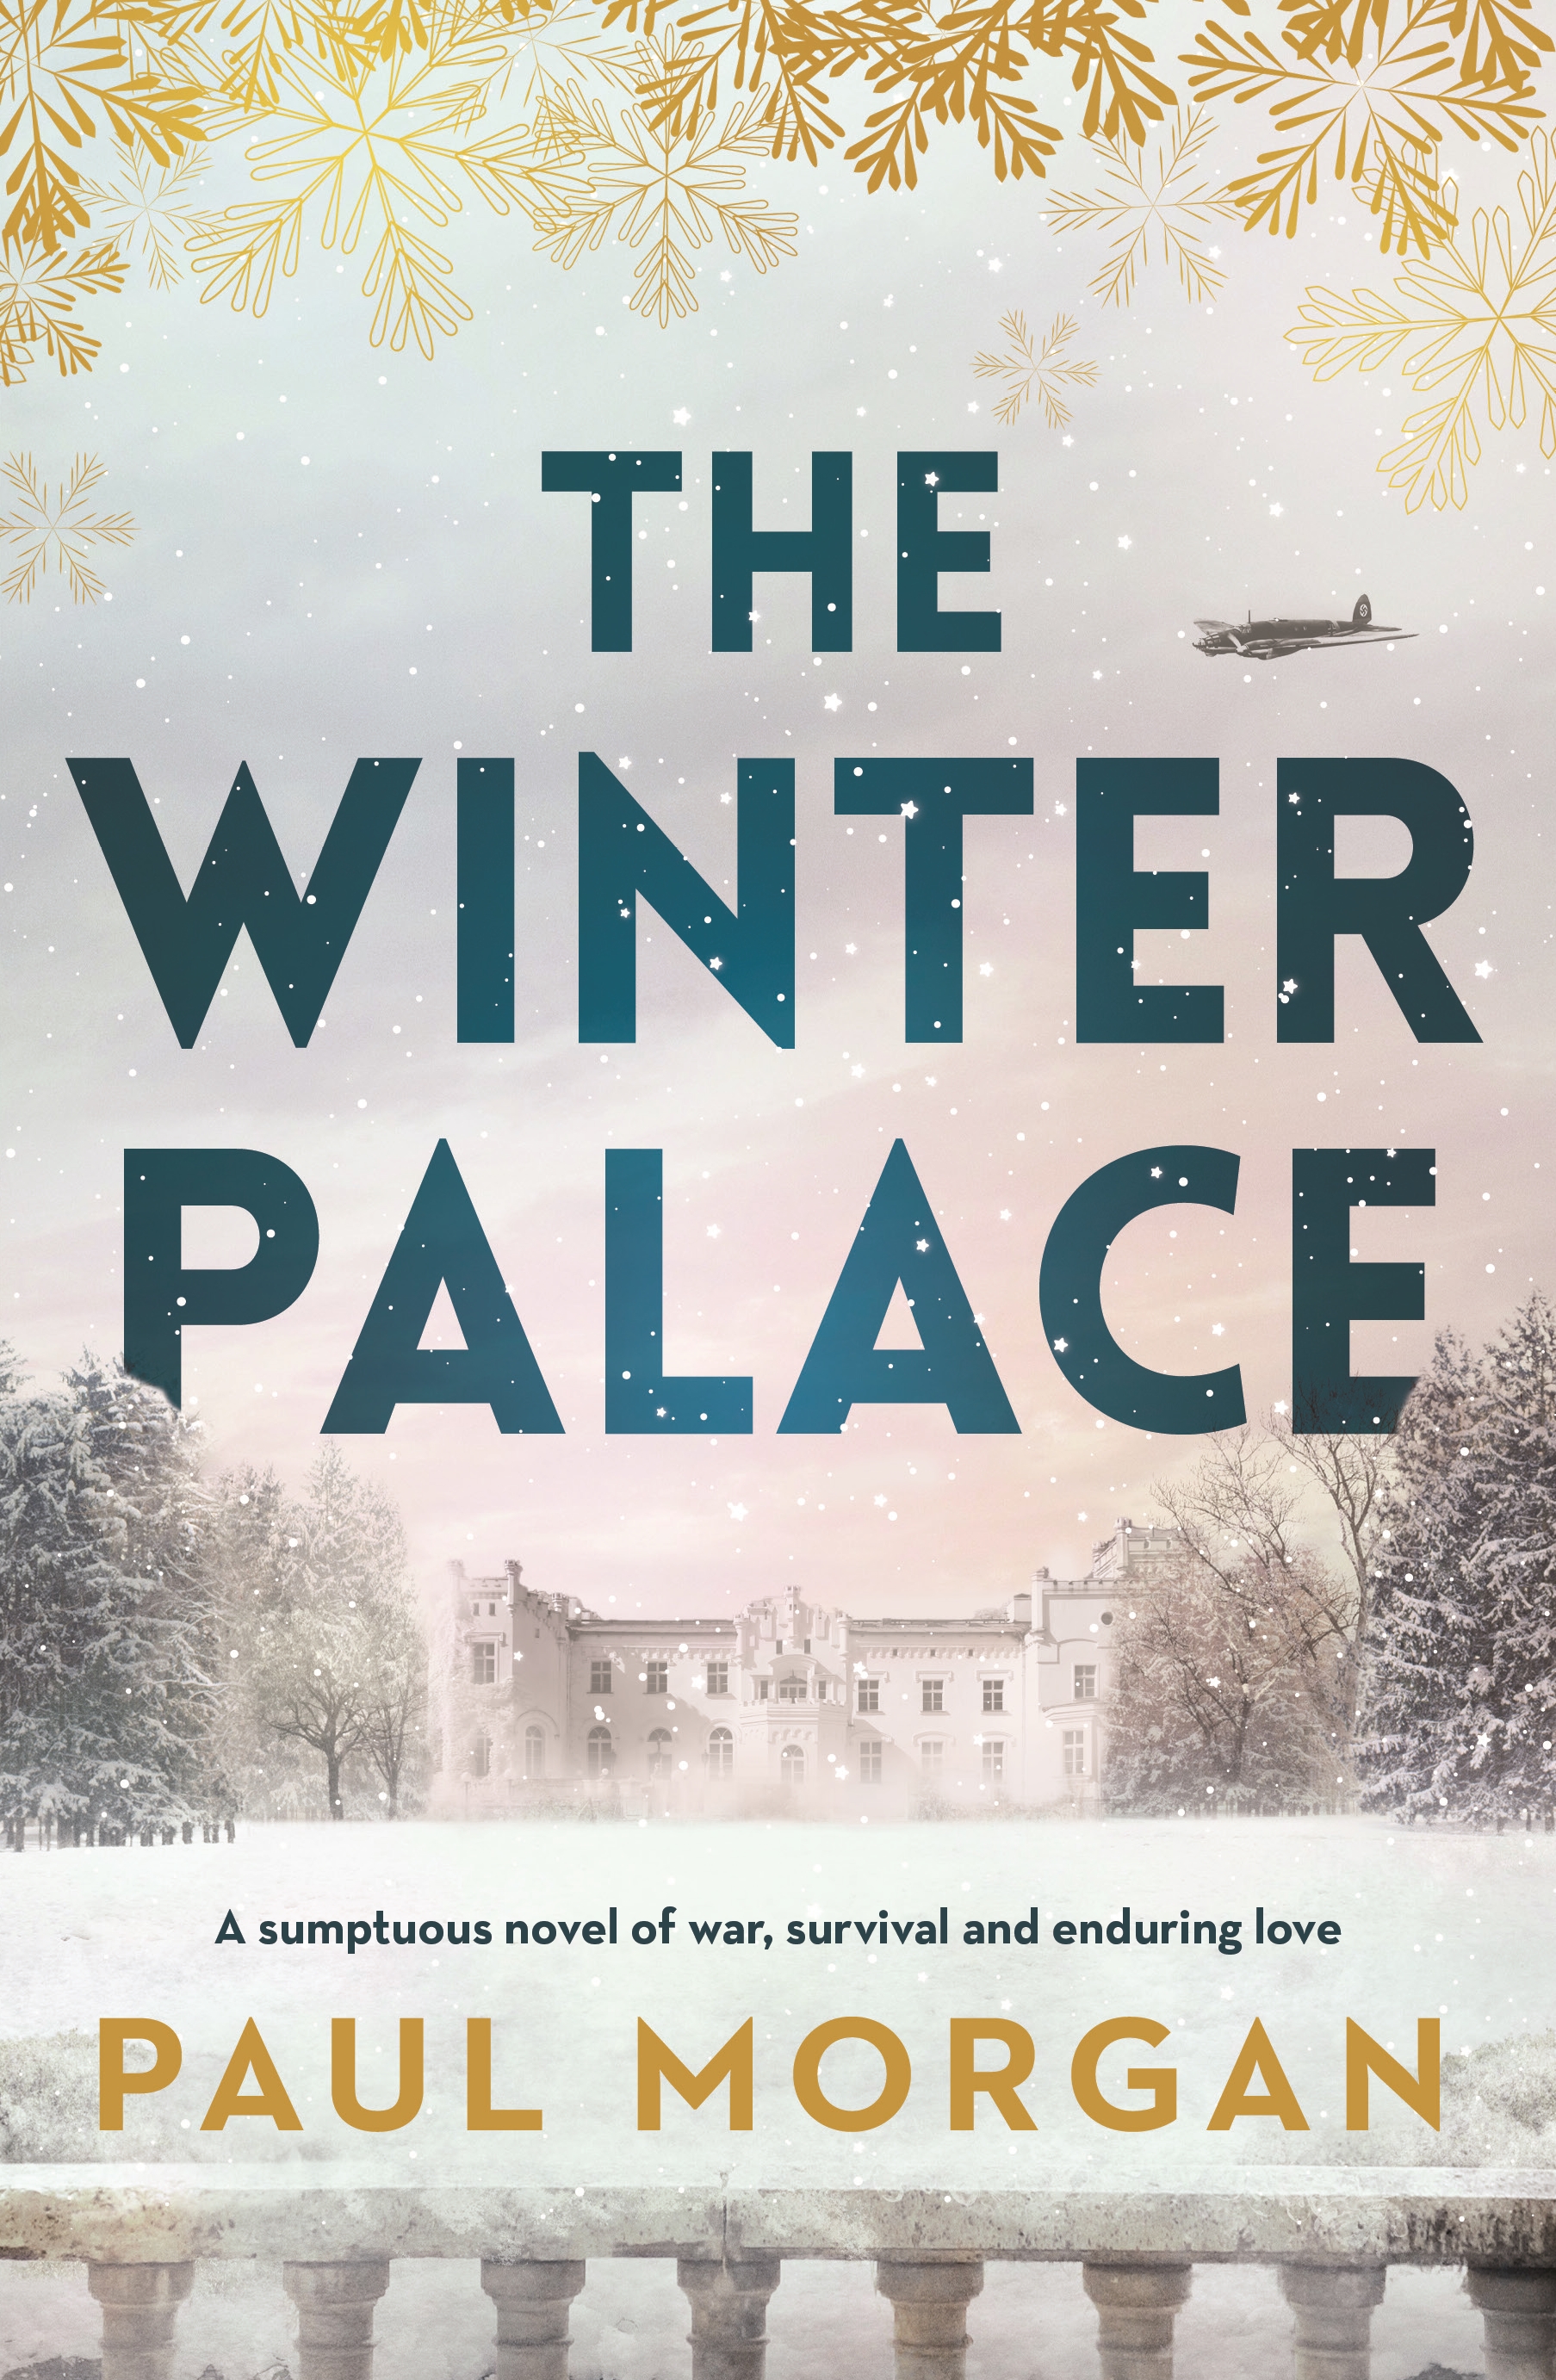 The Winter Palace by Paul Morgan